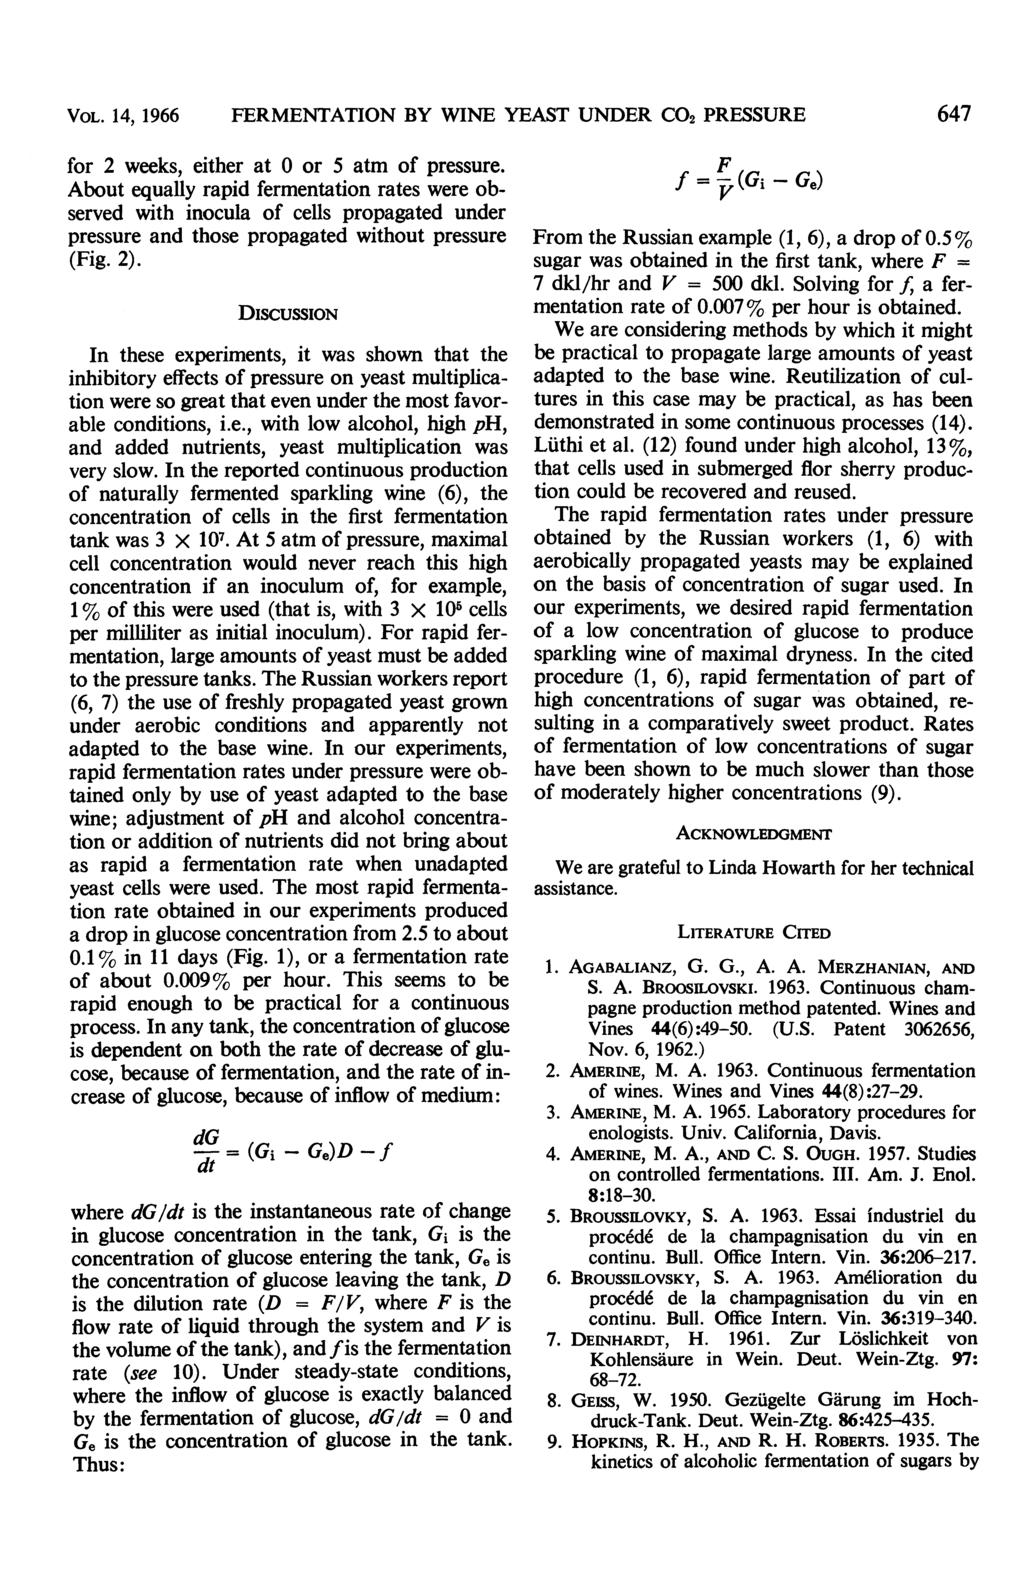 VOL. 14,1966 FERMENTATION BY WINE YEAST UNDER CO2 PRESSURE 647 for 2 weeks, either at 0 or 5 atm of pressure.